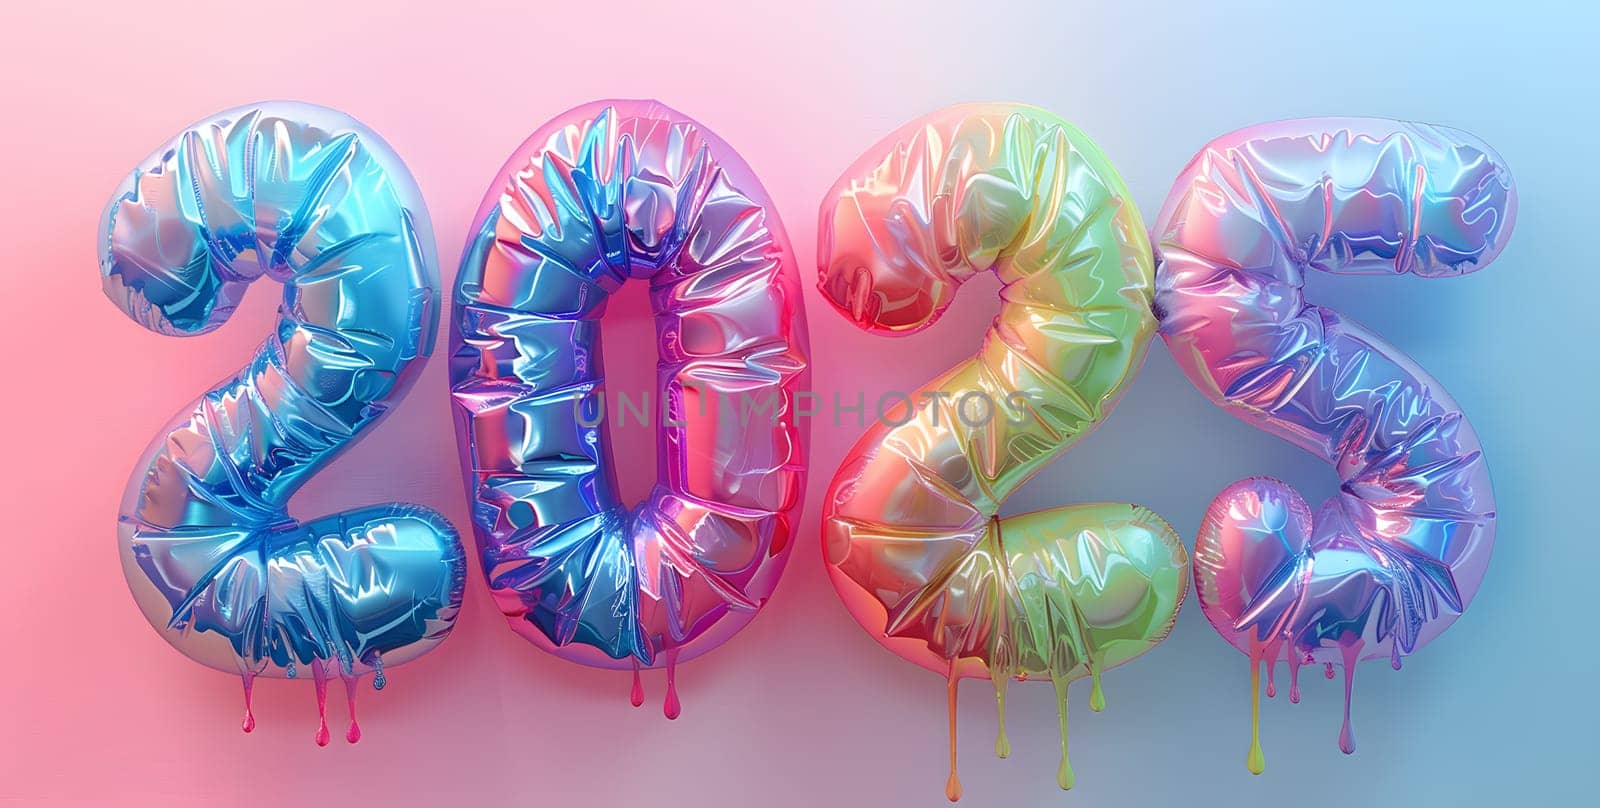 The number 2022 is depicted as a vibrant display of colorful balloons against a pink and electric blue background, creating an eyecatching and festive atmosphere